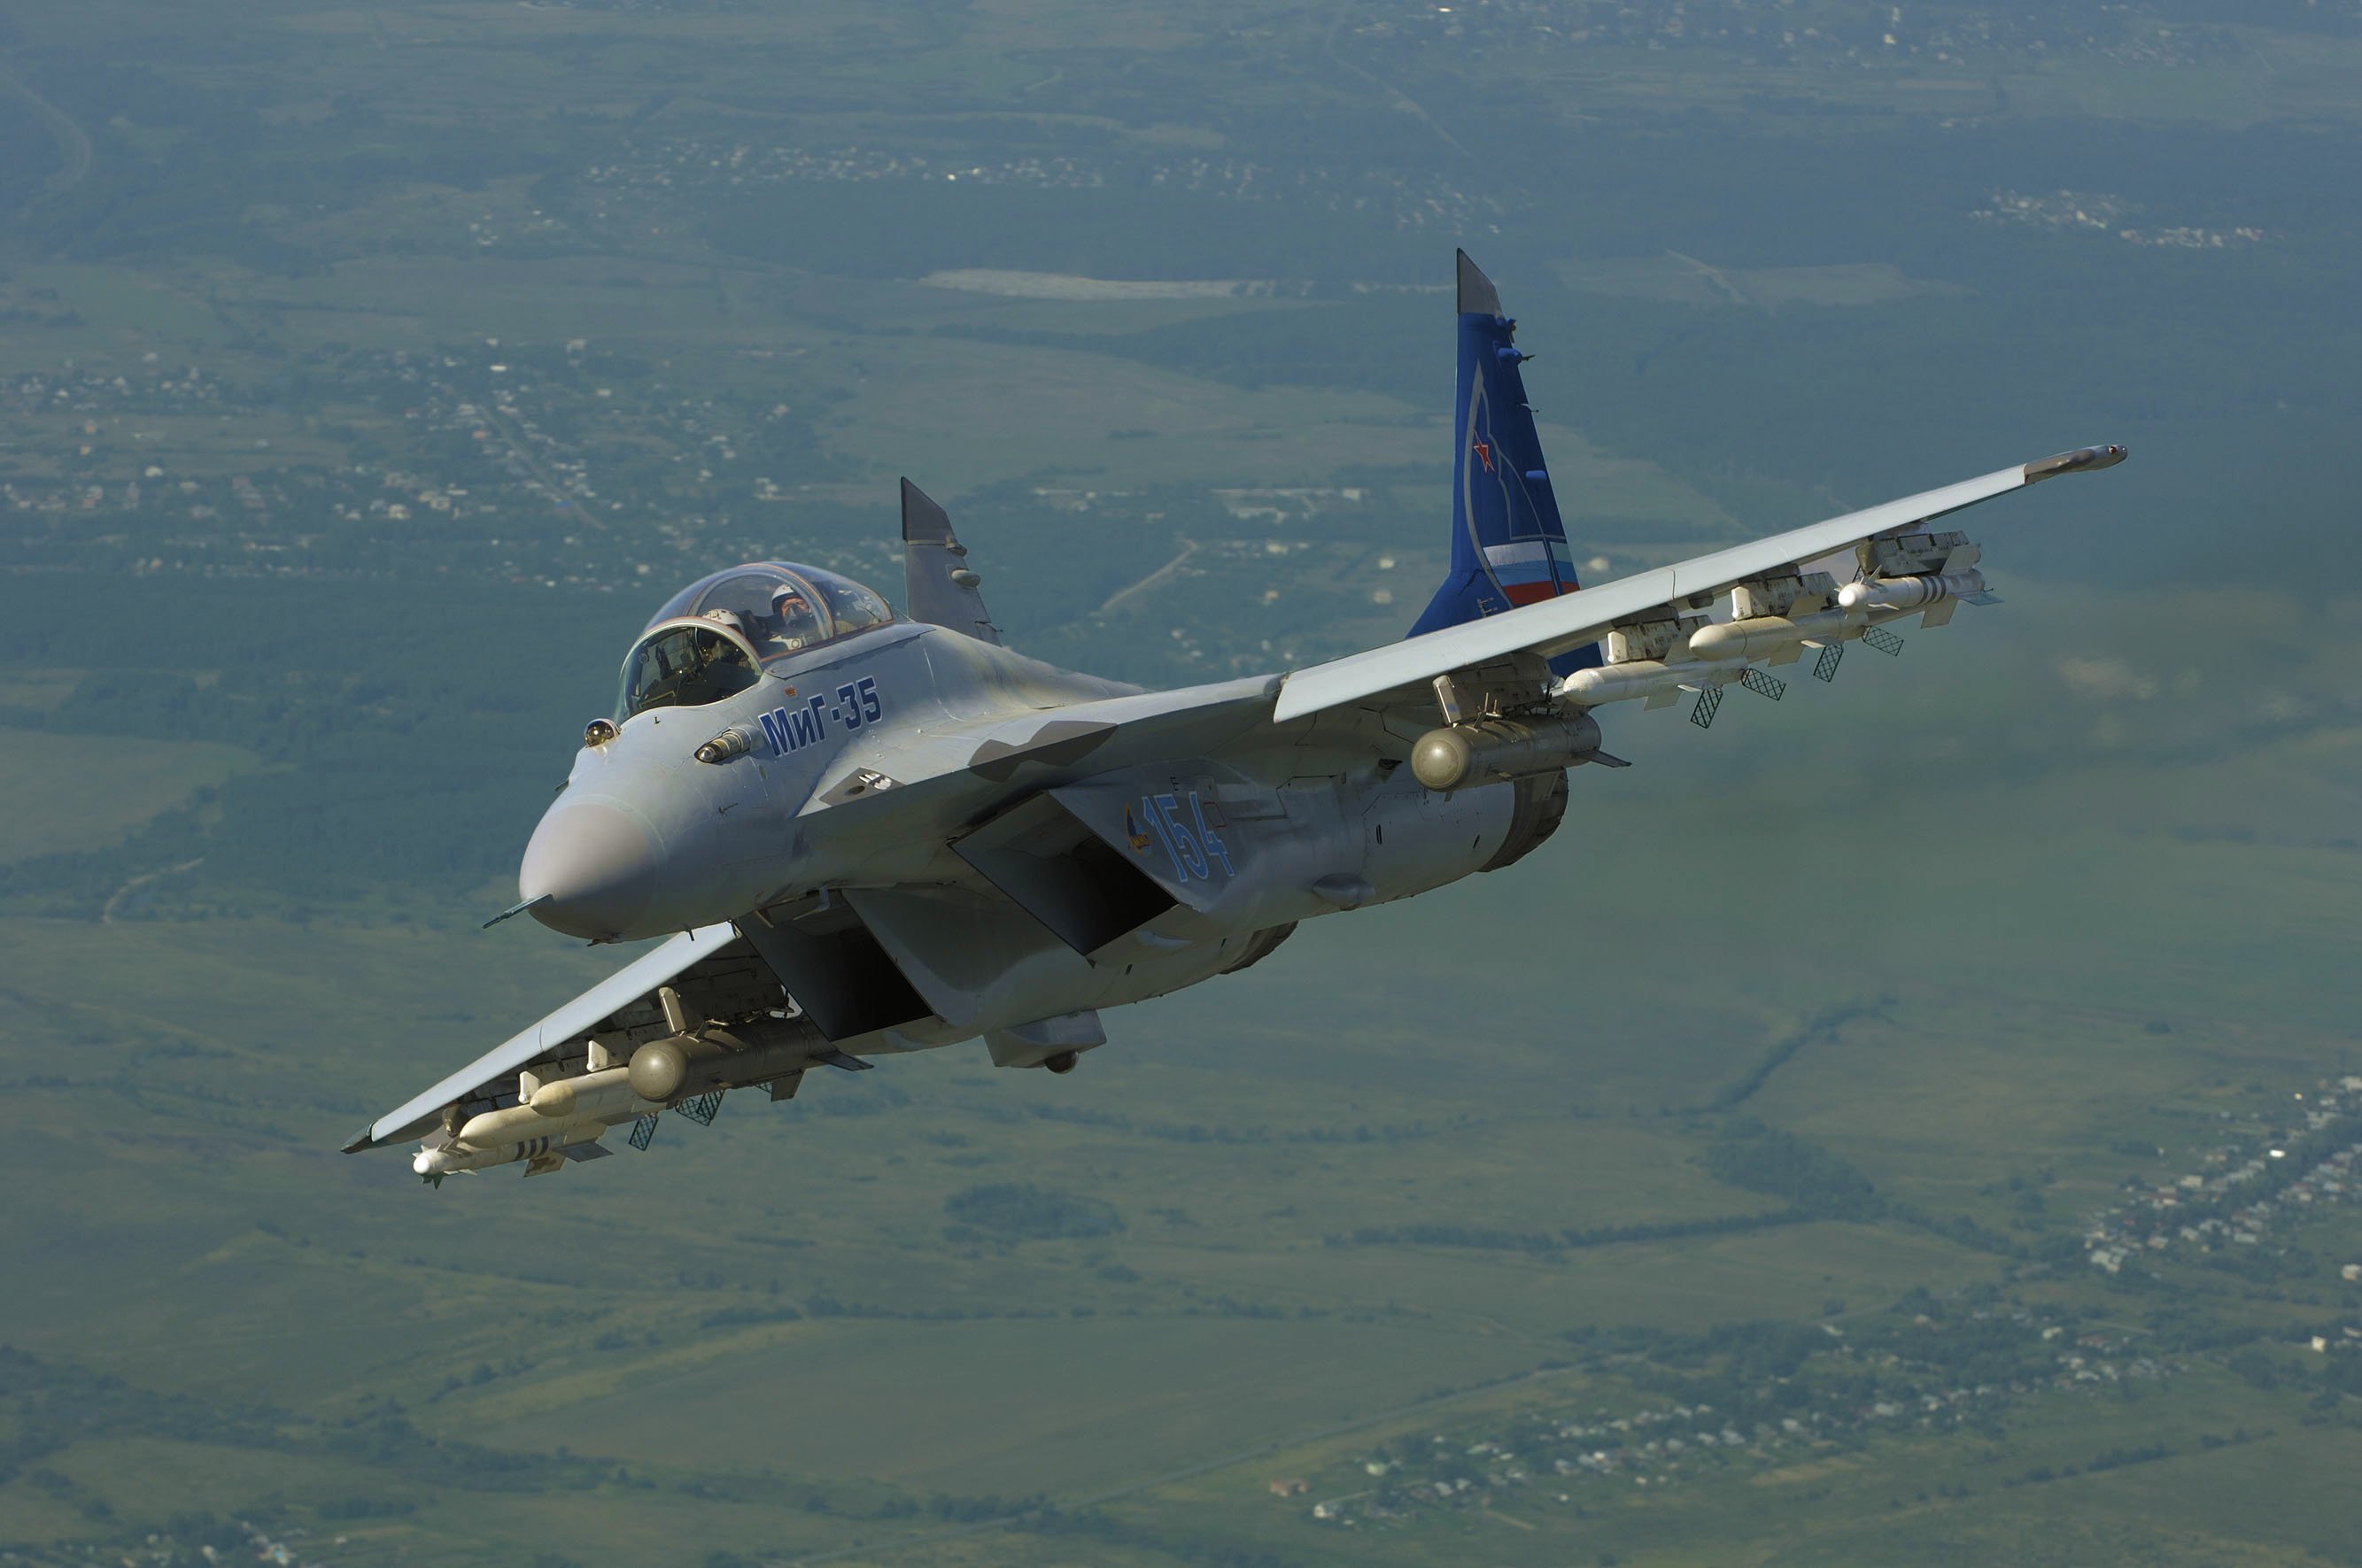 mig 35, Fighter, Jet, Russian, Airplane, Plane, Military, Mig,  1 Wallpaper